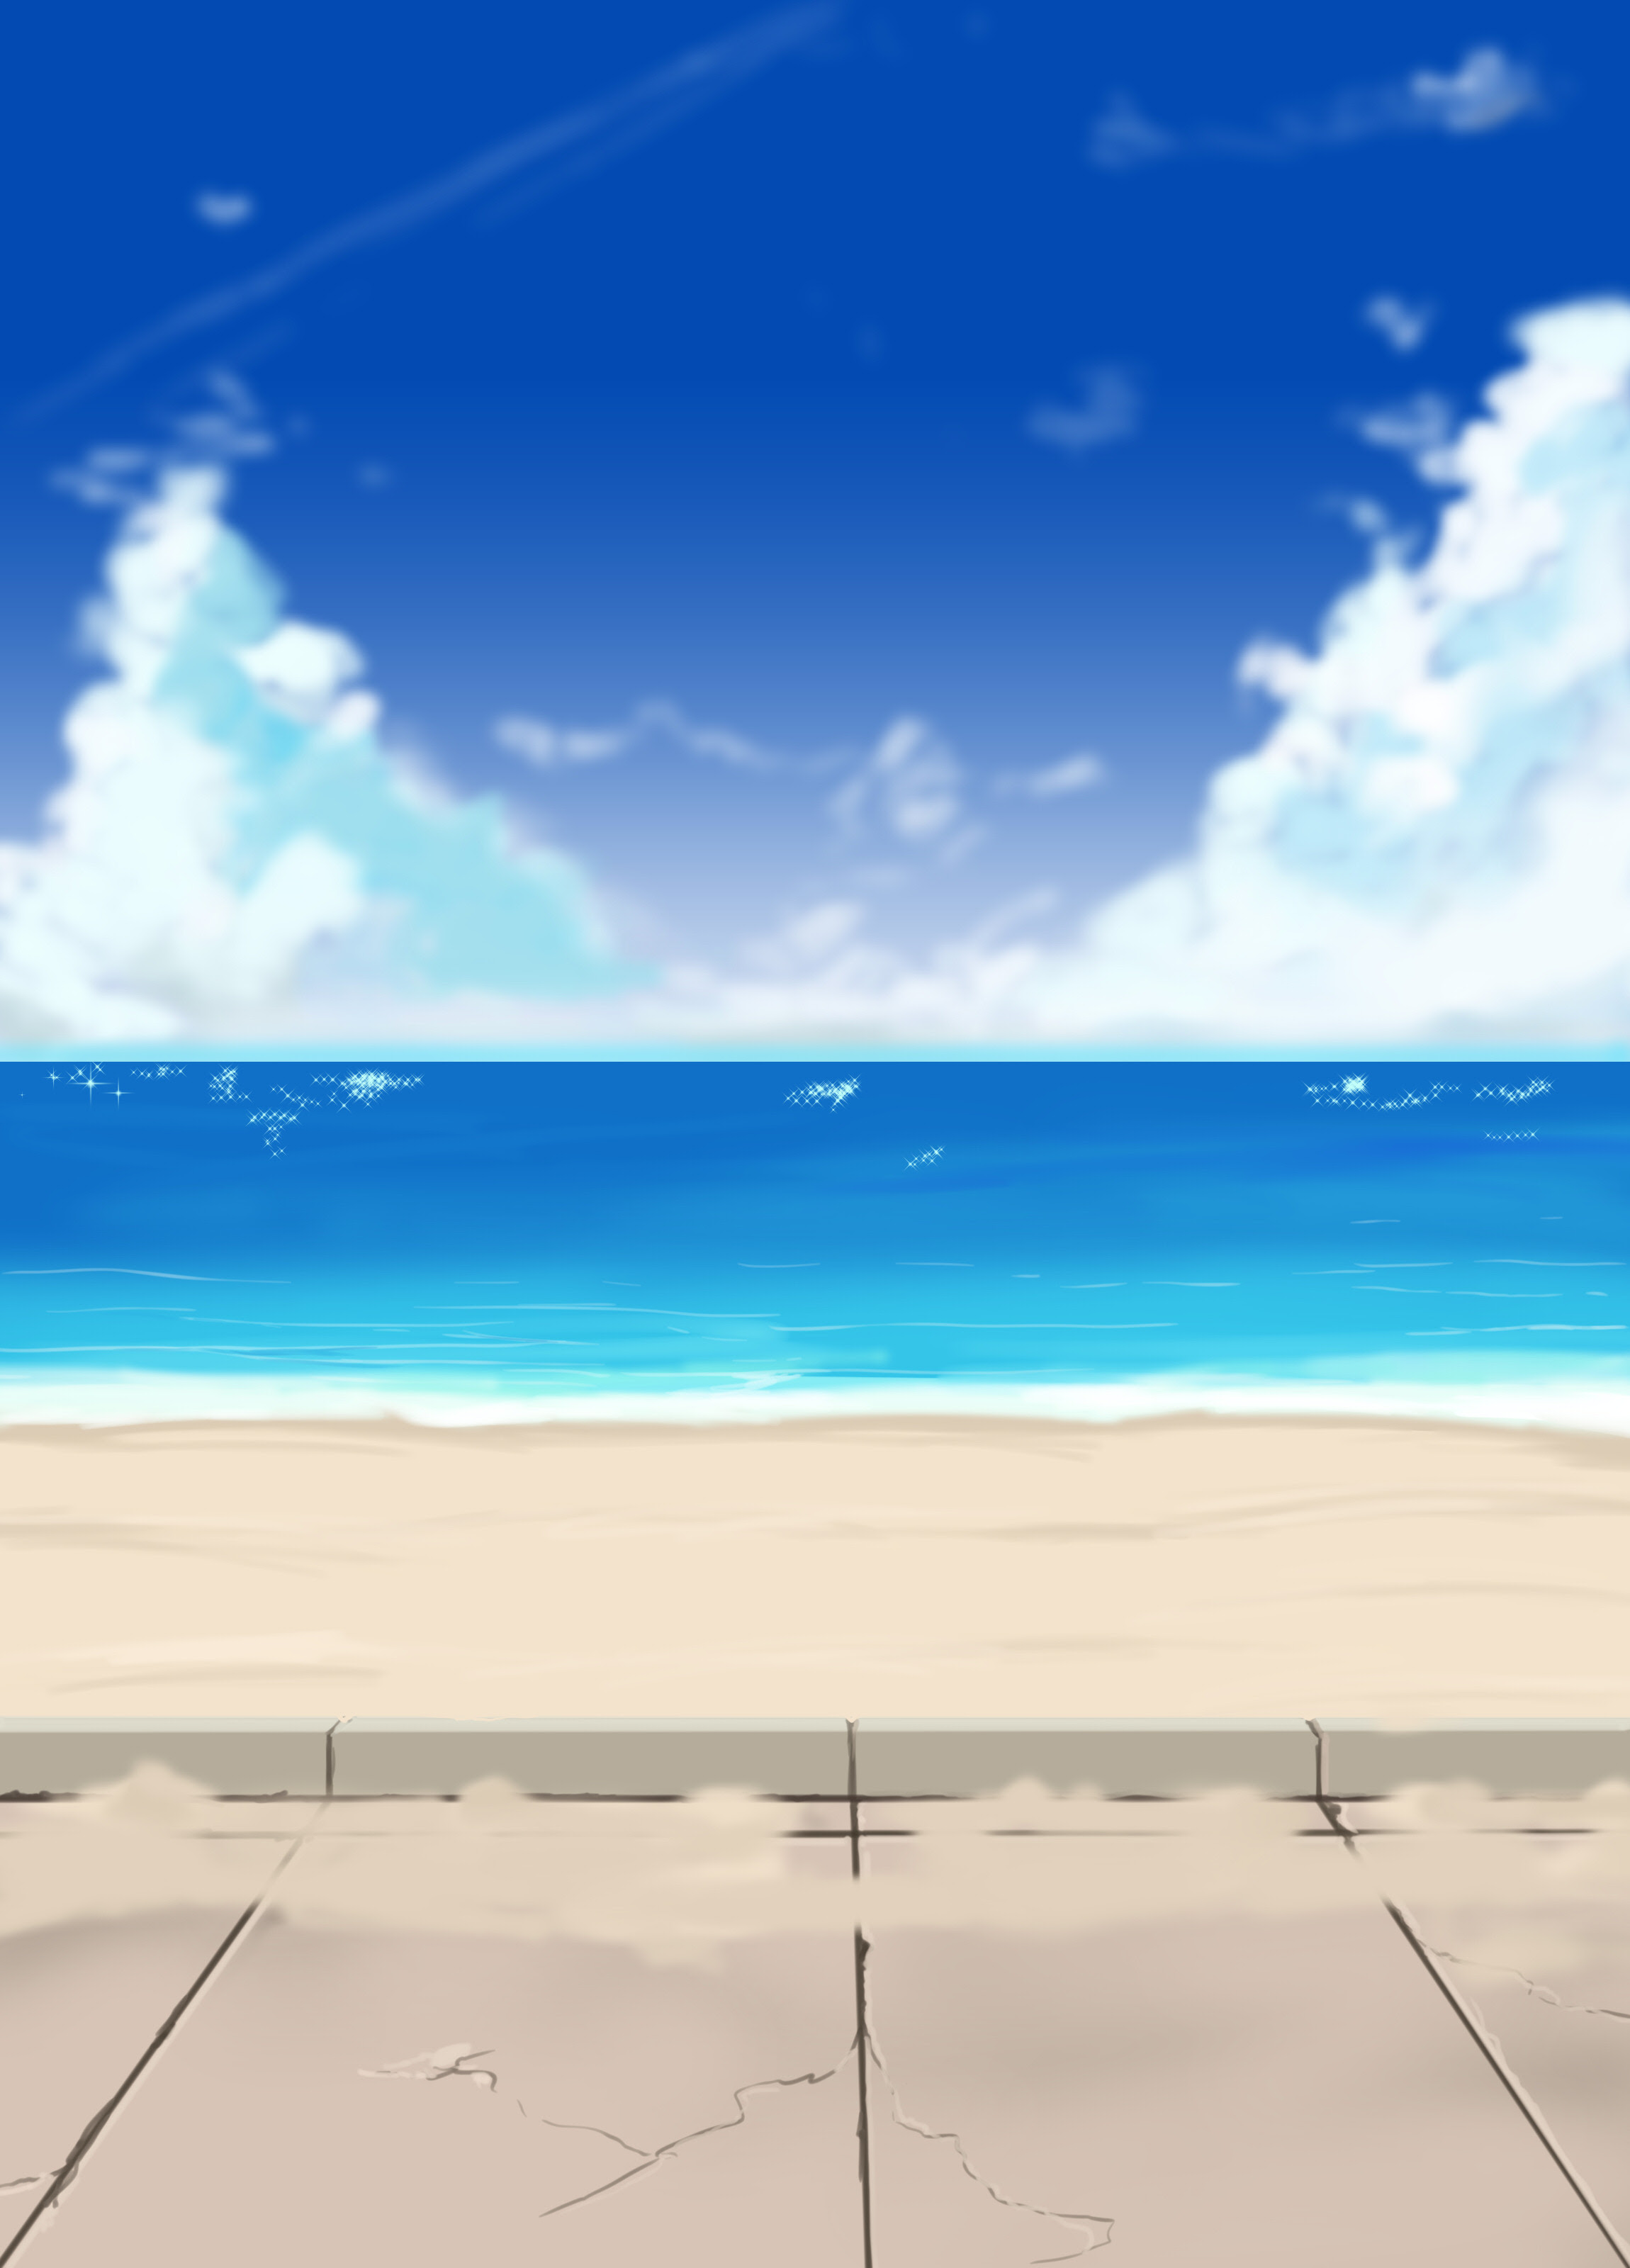 Anime Style Beach Background and Path by wbd on DeviantArt